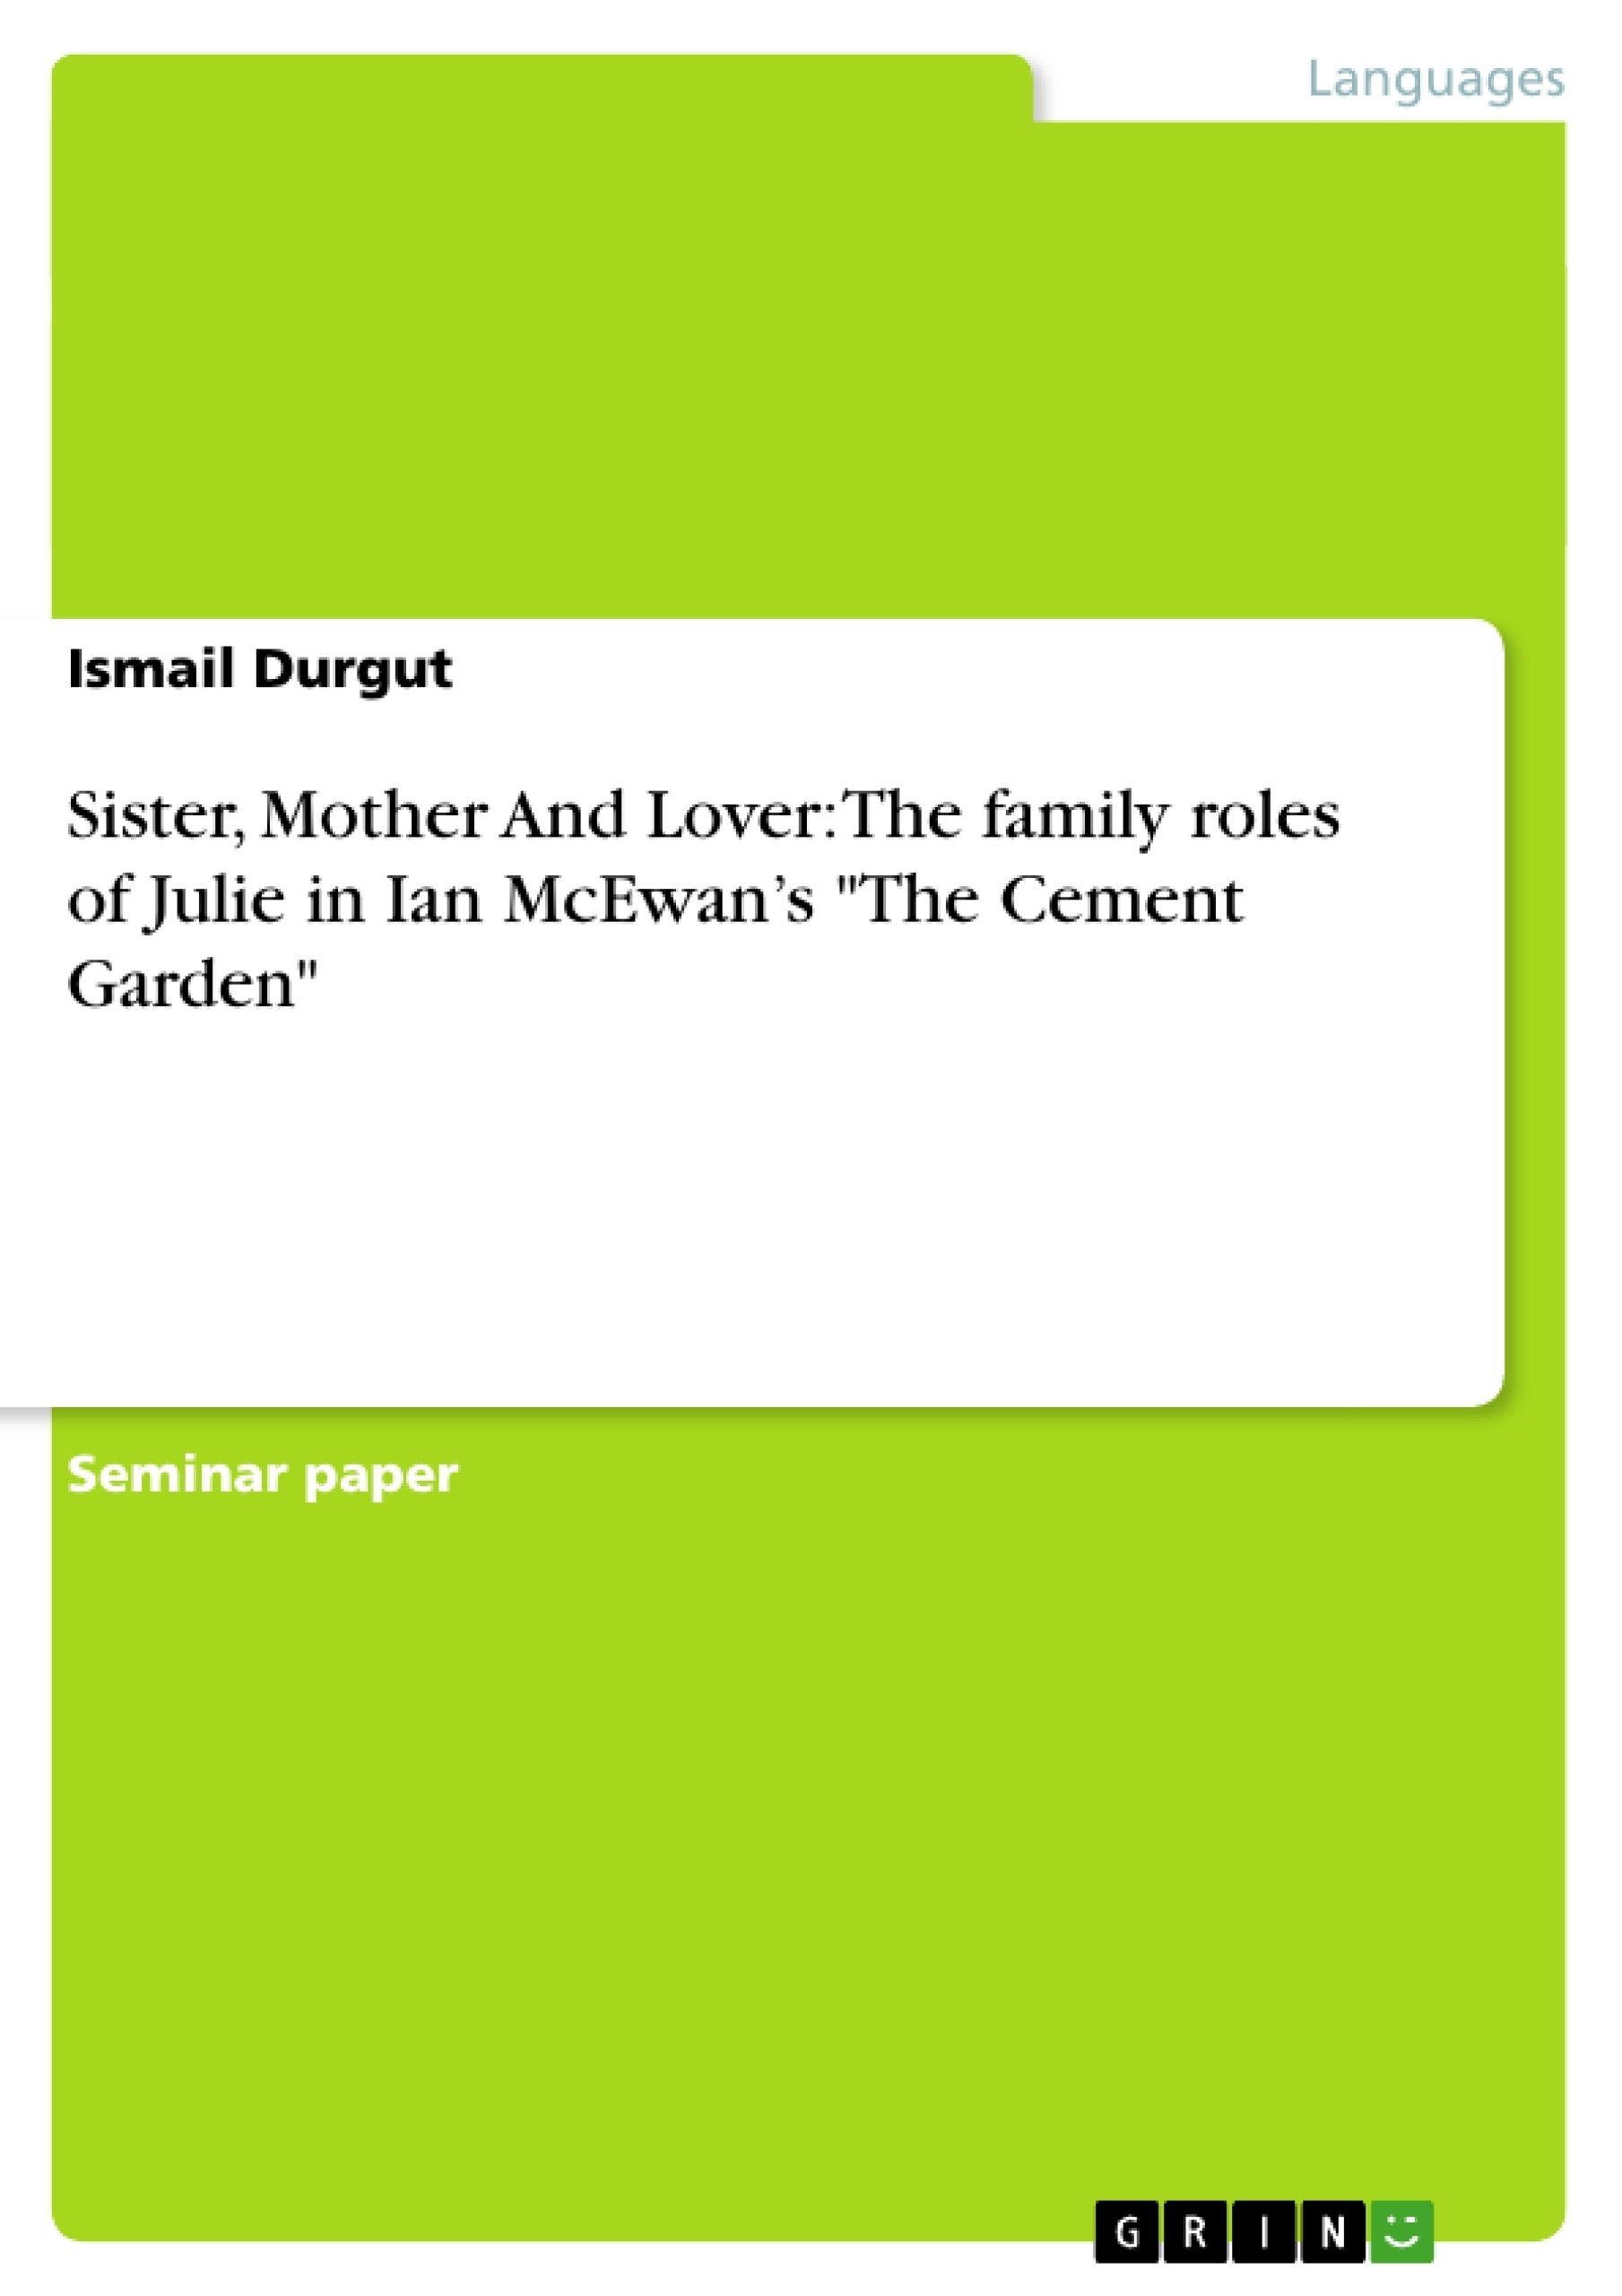 Título: Sister, Mother And Lover: The family roles of Julie in Ian McEwan’s "The Cement Garden"